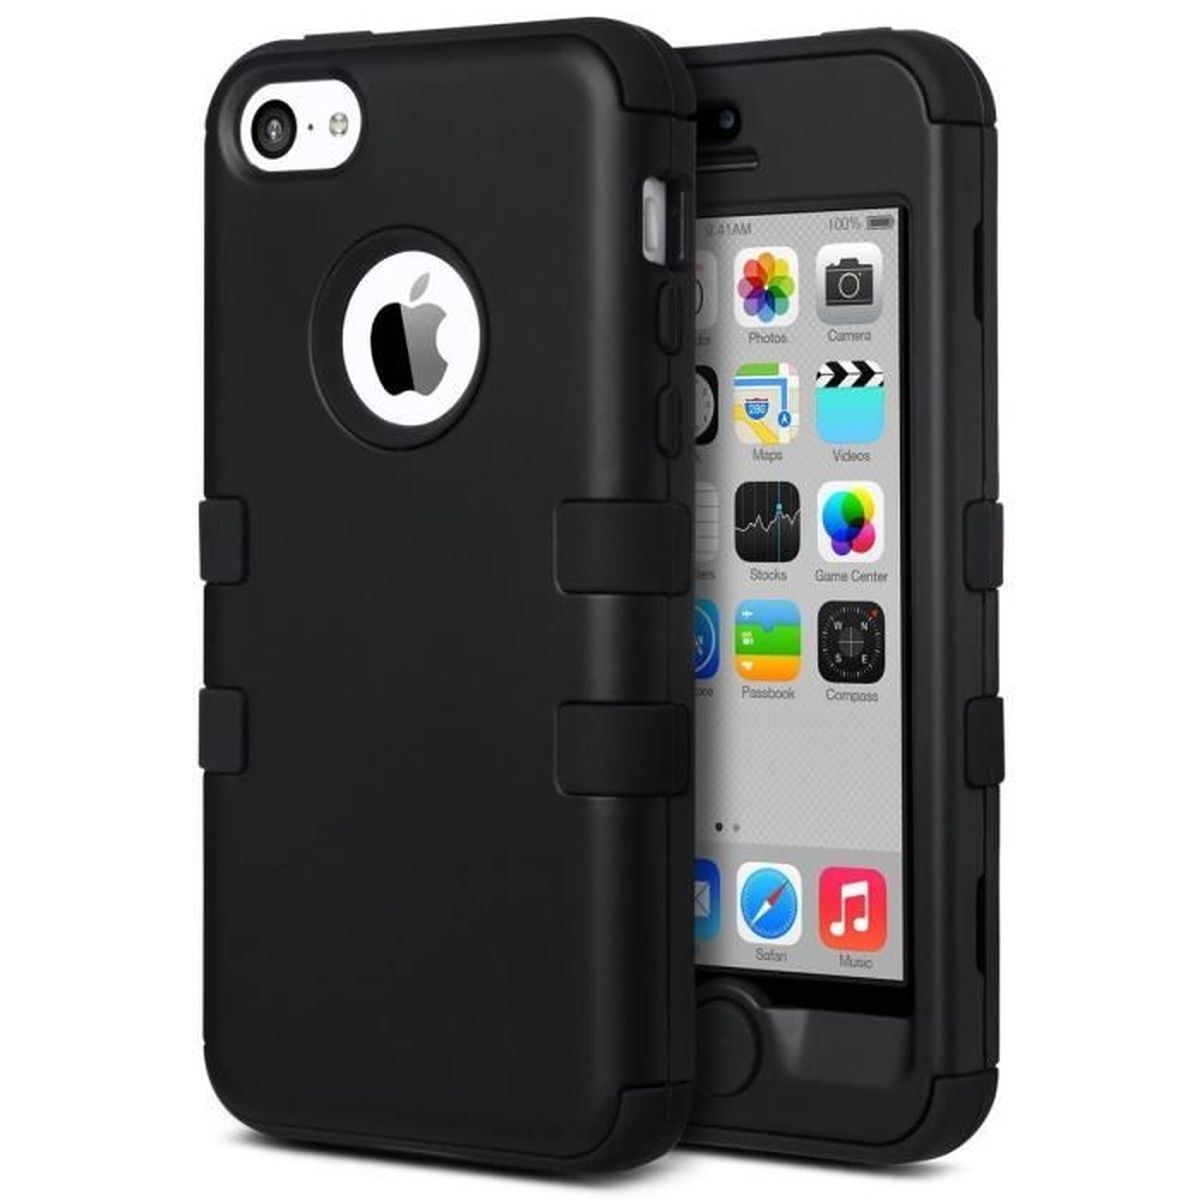 les coques iphone 5 c protection